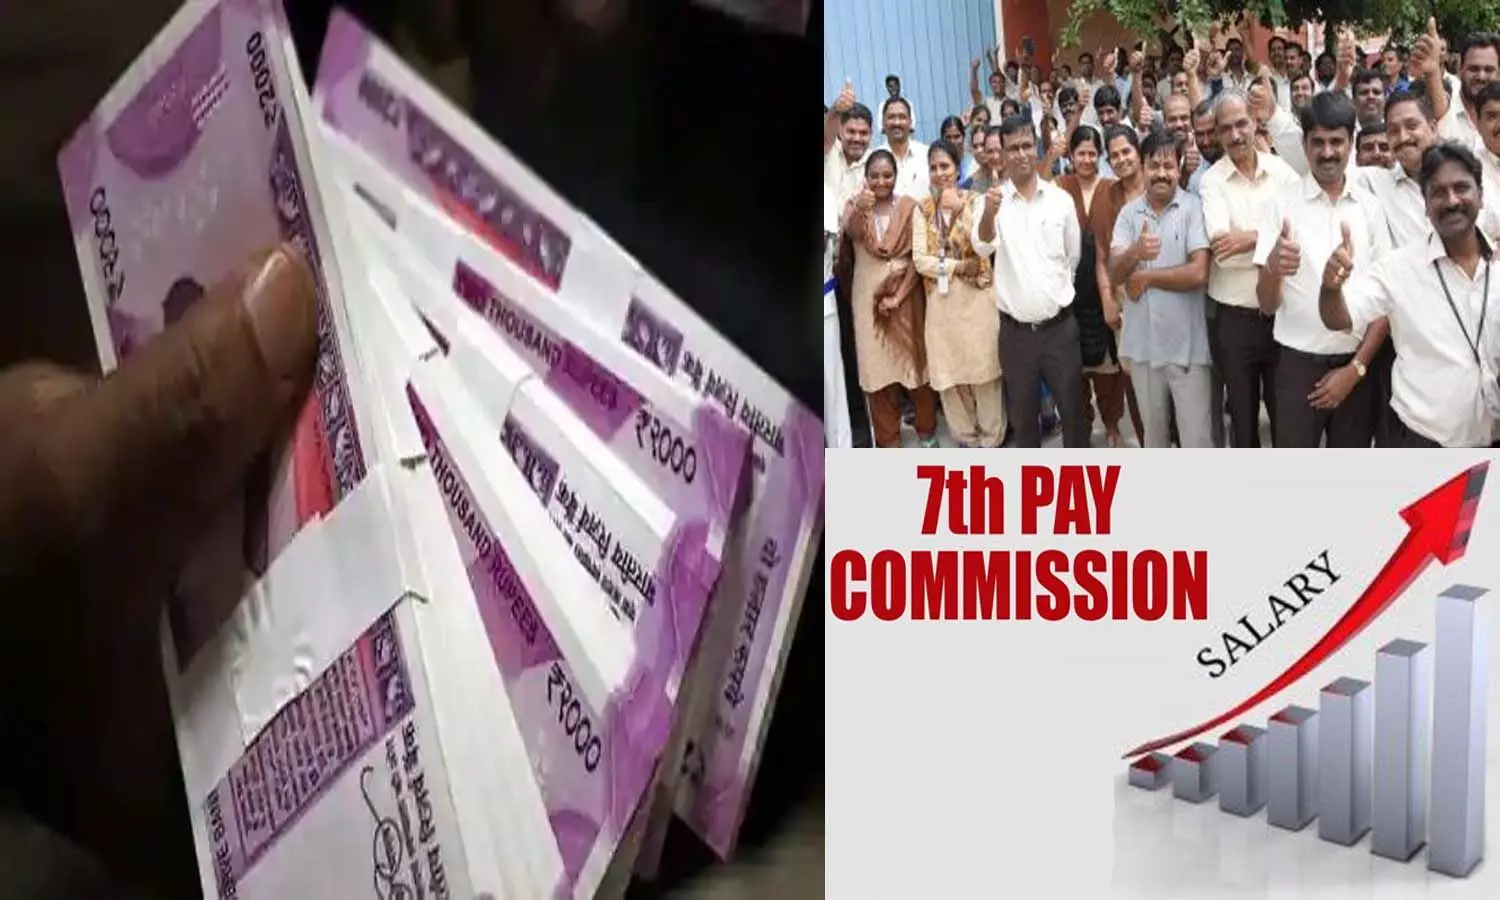 7th Pay Commission increase in DA and arrears